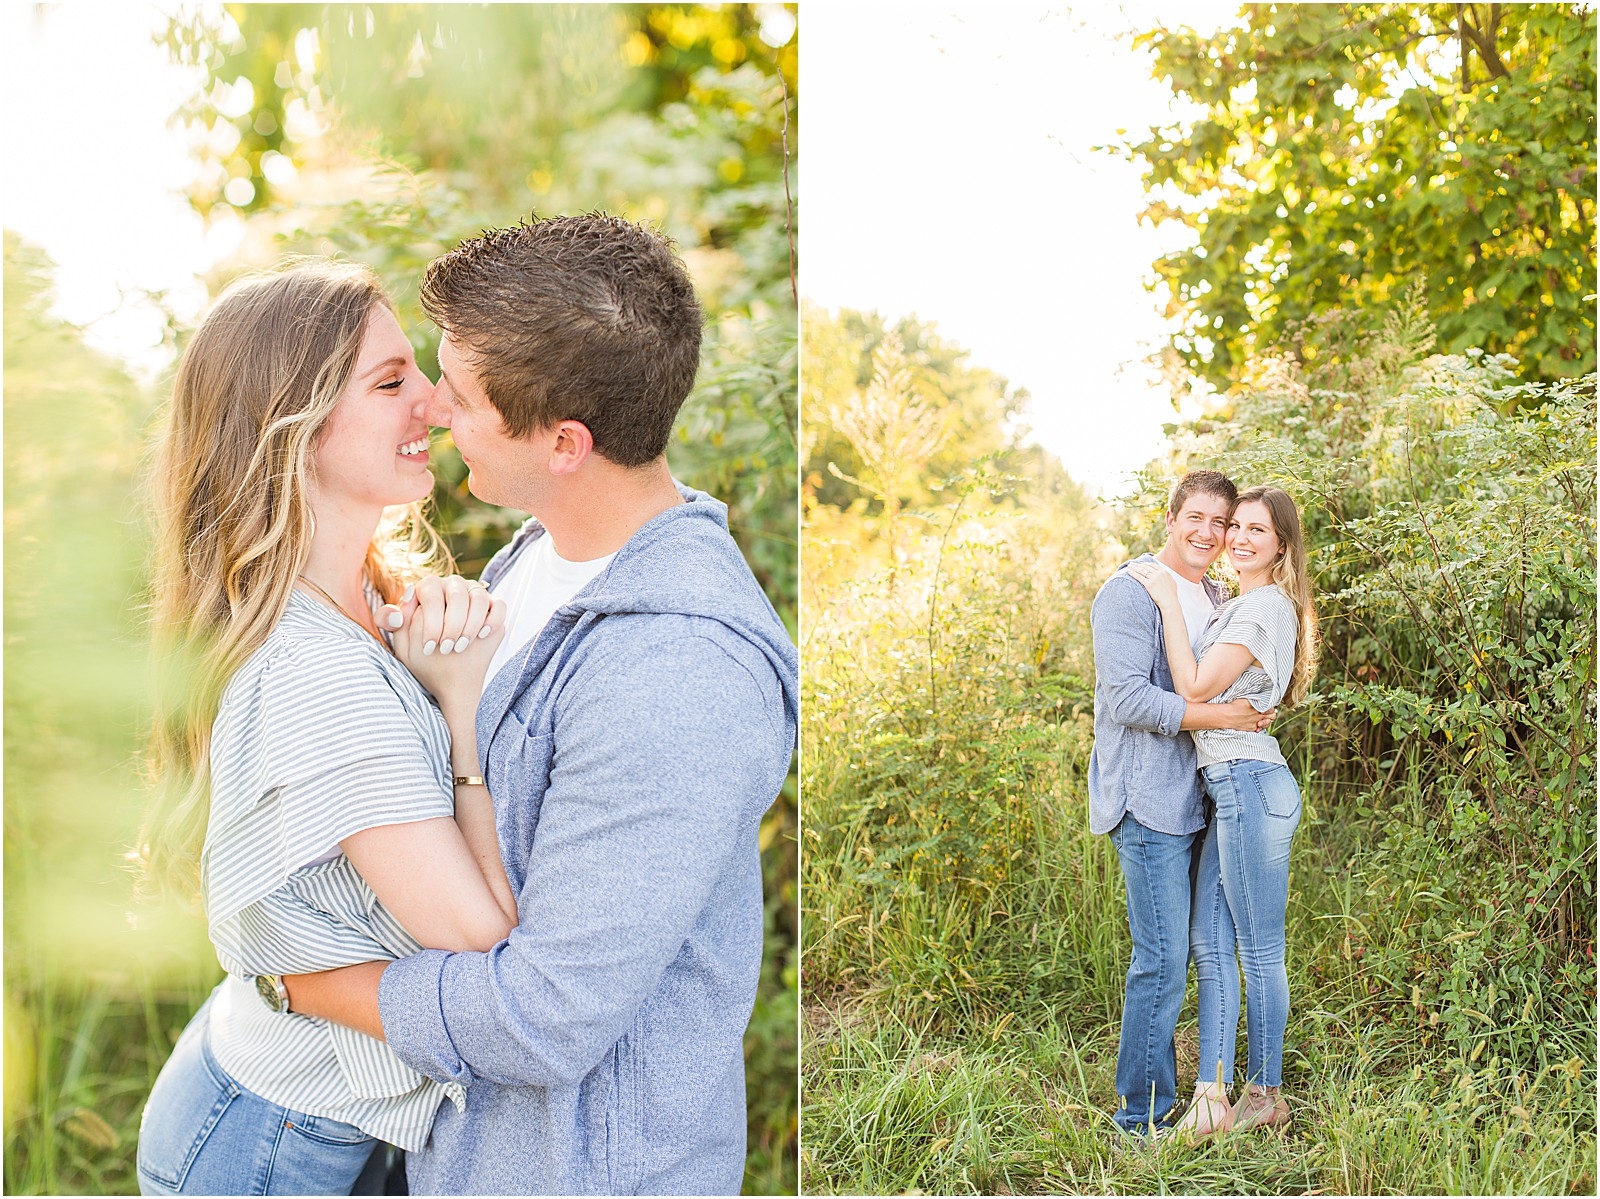 A Jasper Indiana Engagement Session | Tori and Kyle | Bret and Brandie Photography009.jpg